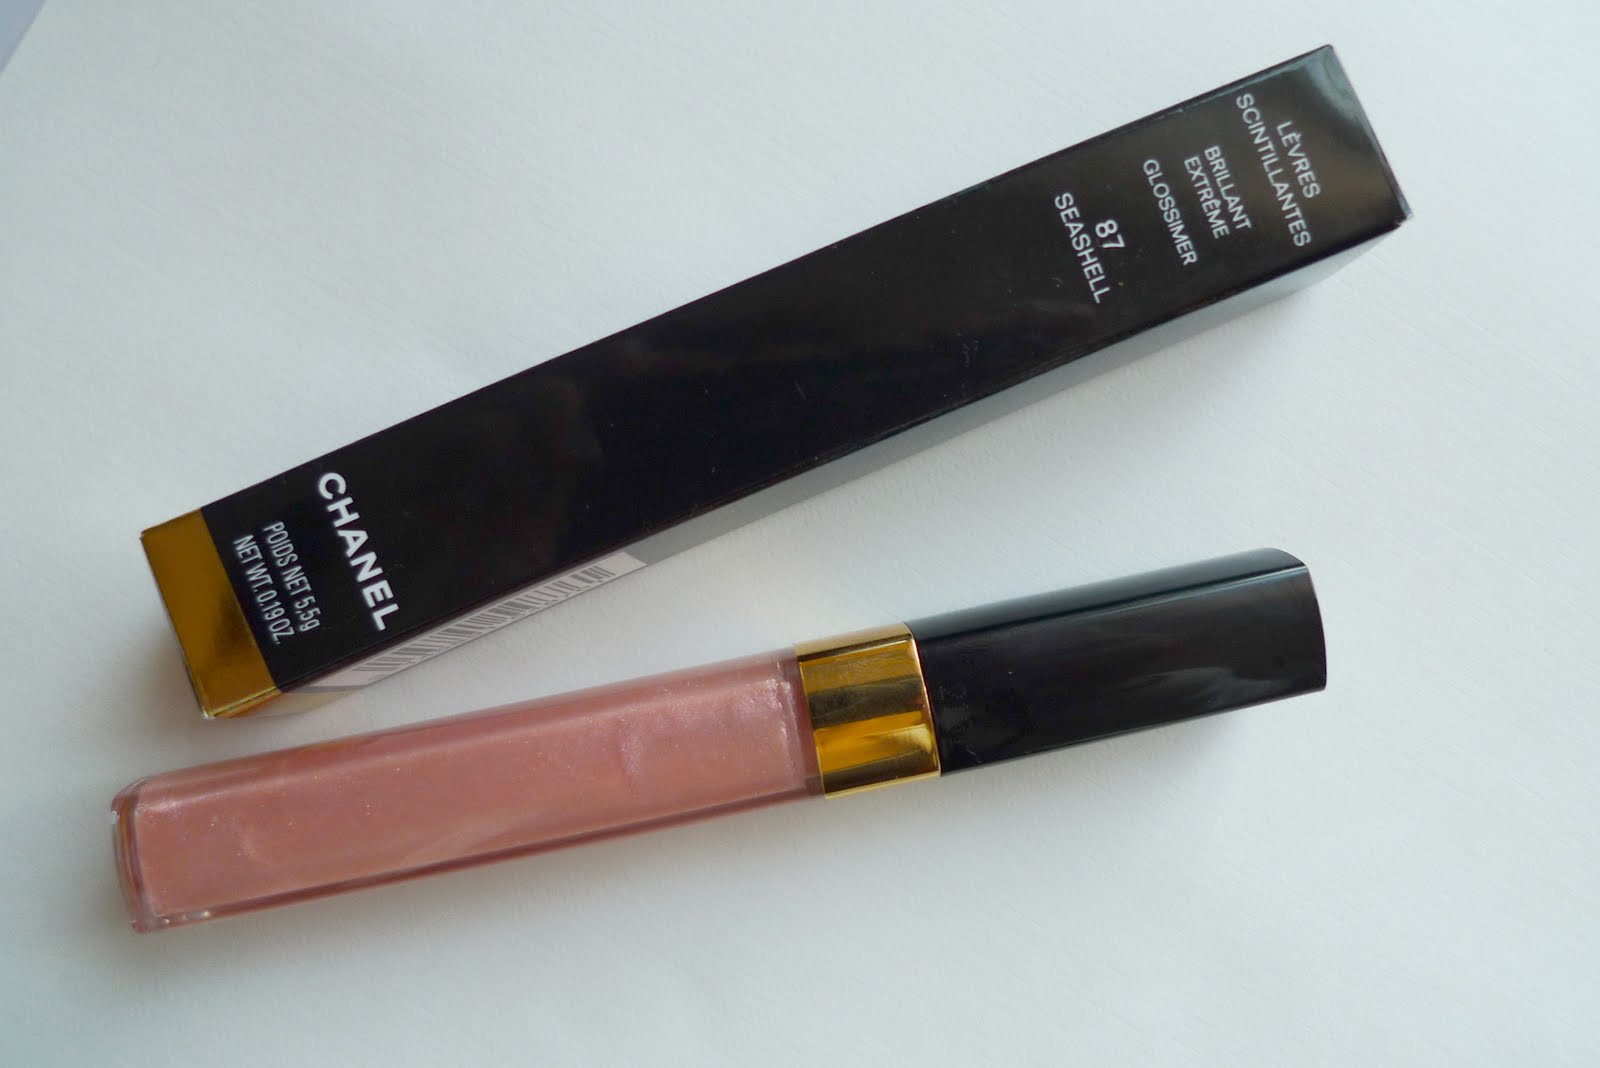 Chanel Amuse Bouche Rouge Coco Gloss Review & Swatches